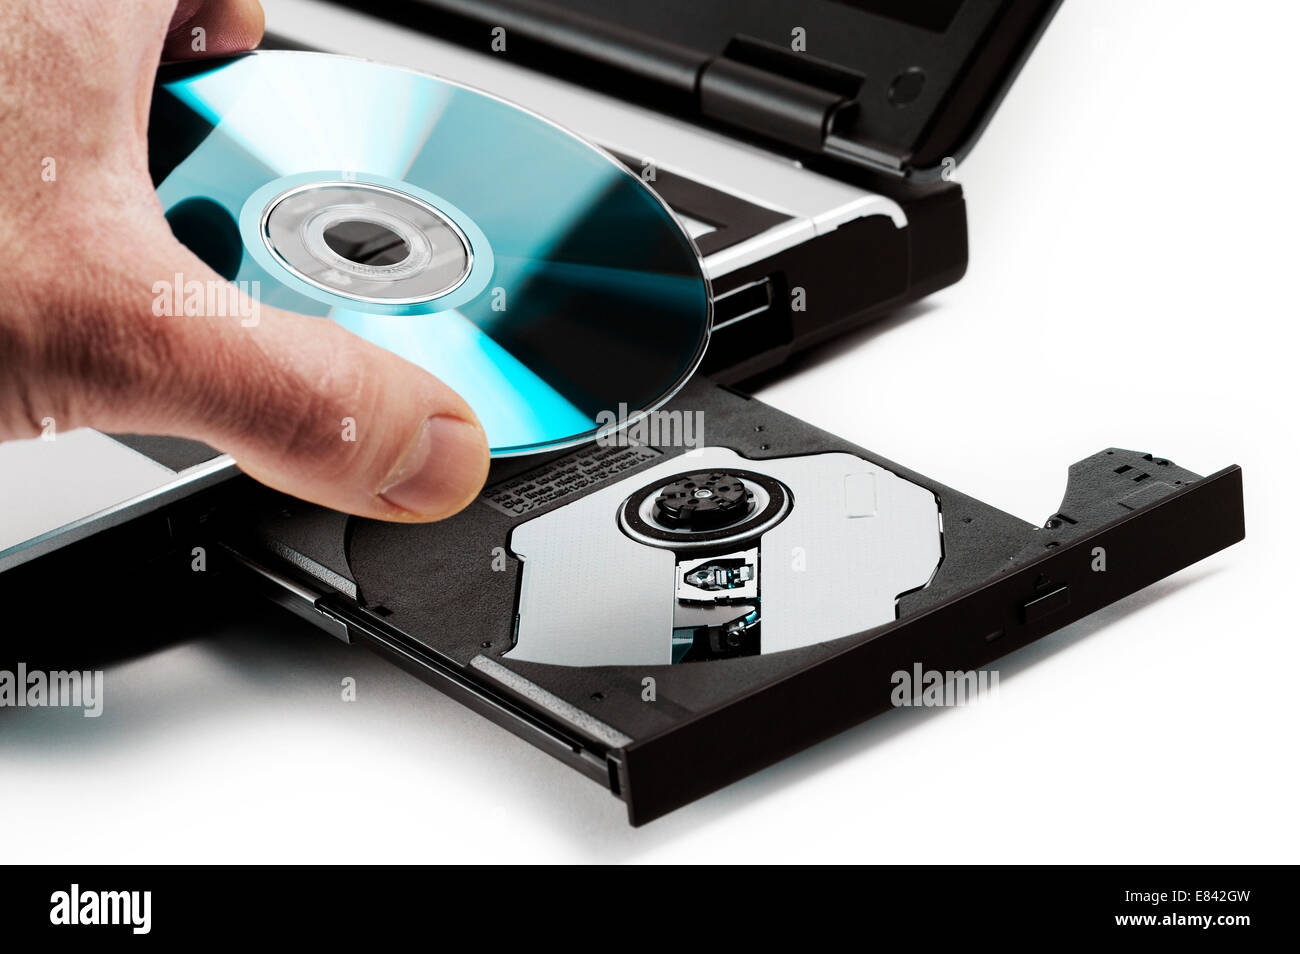 compact disk inserted on notebook drive, on white background Stock Photo